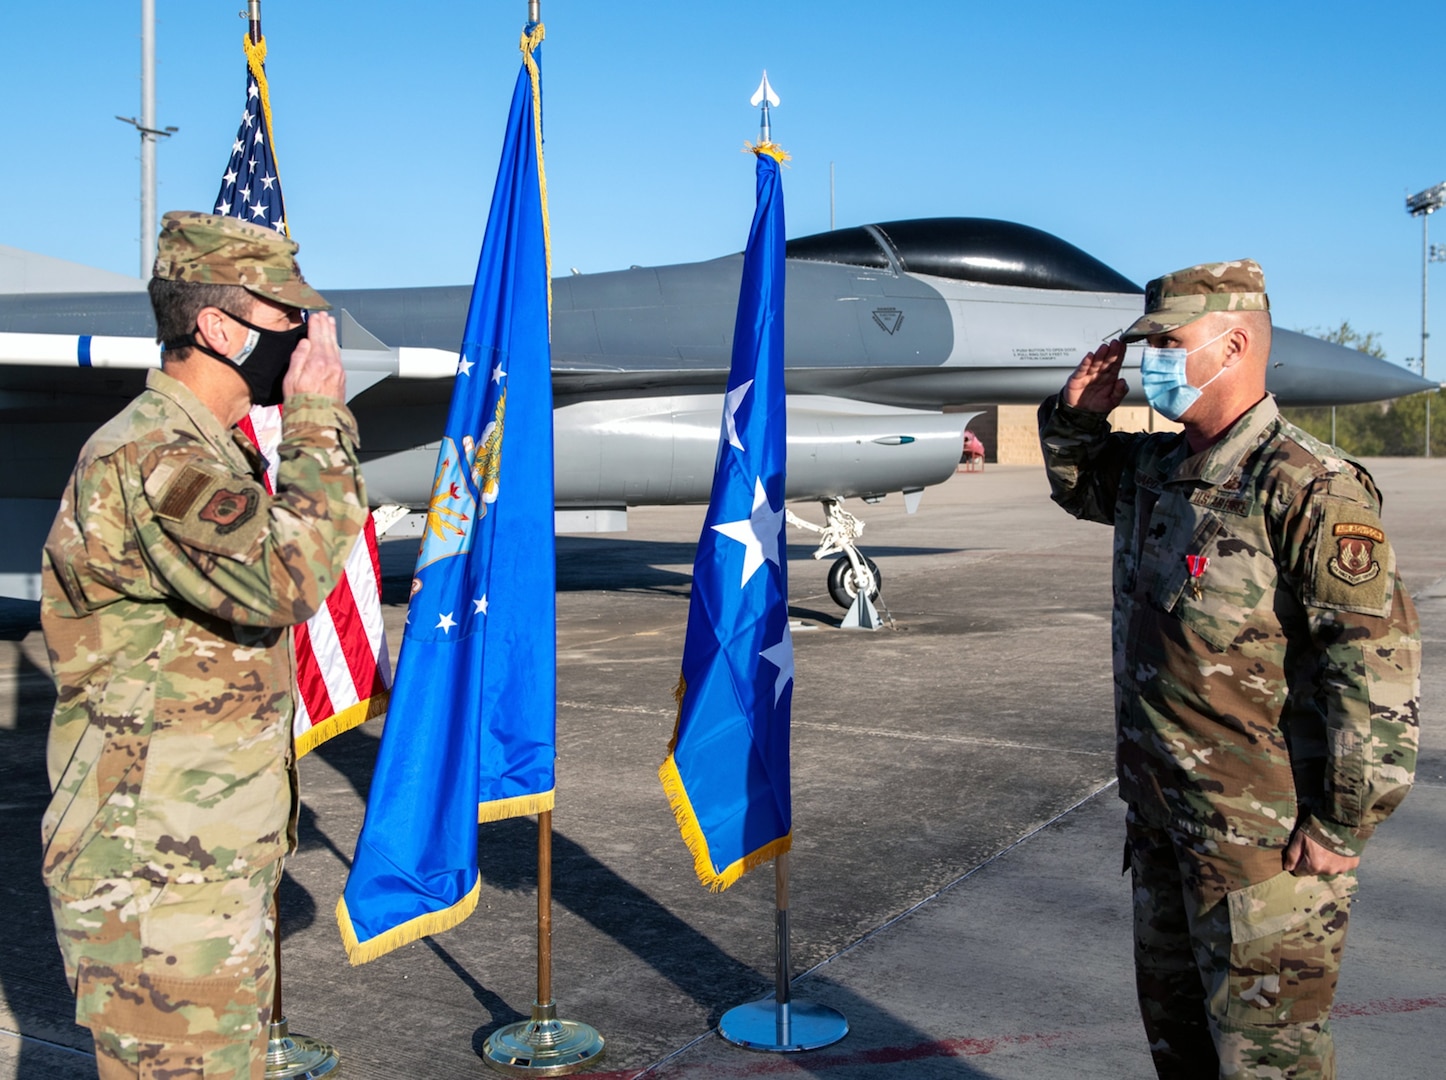 Air Force Lt. Gen. Shaun Morris (left), Air Force Life Cycle Management Center commander, returns a salute after presenting Lt. Col. Bryan Howard (right), Deputy Branch Chief Sustainment, with the Bronze Star Nov. 16 at Joint Base San Antonio-Chapman Annex.